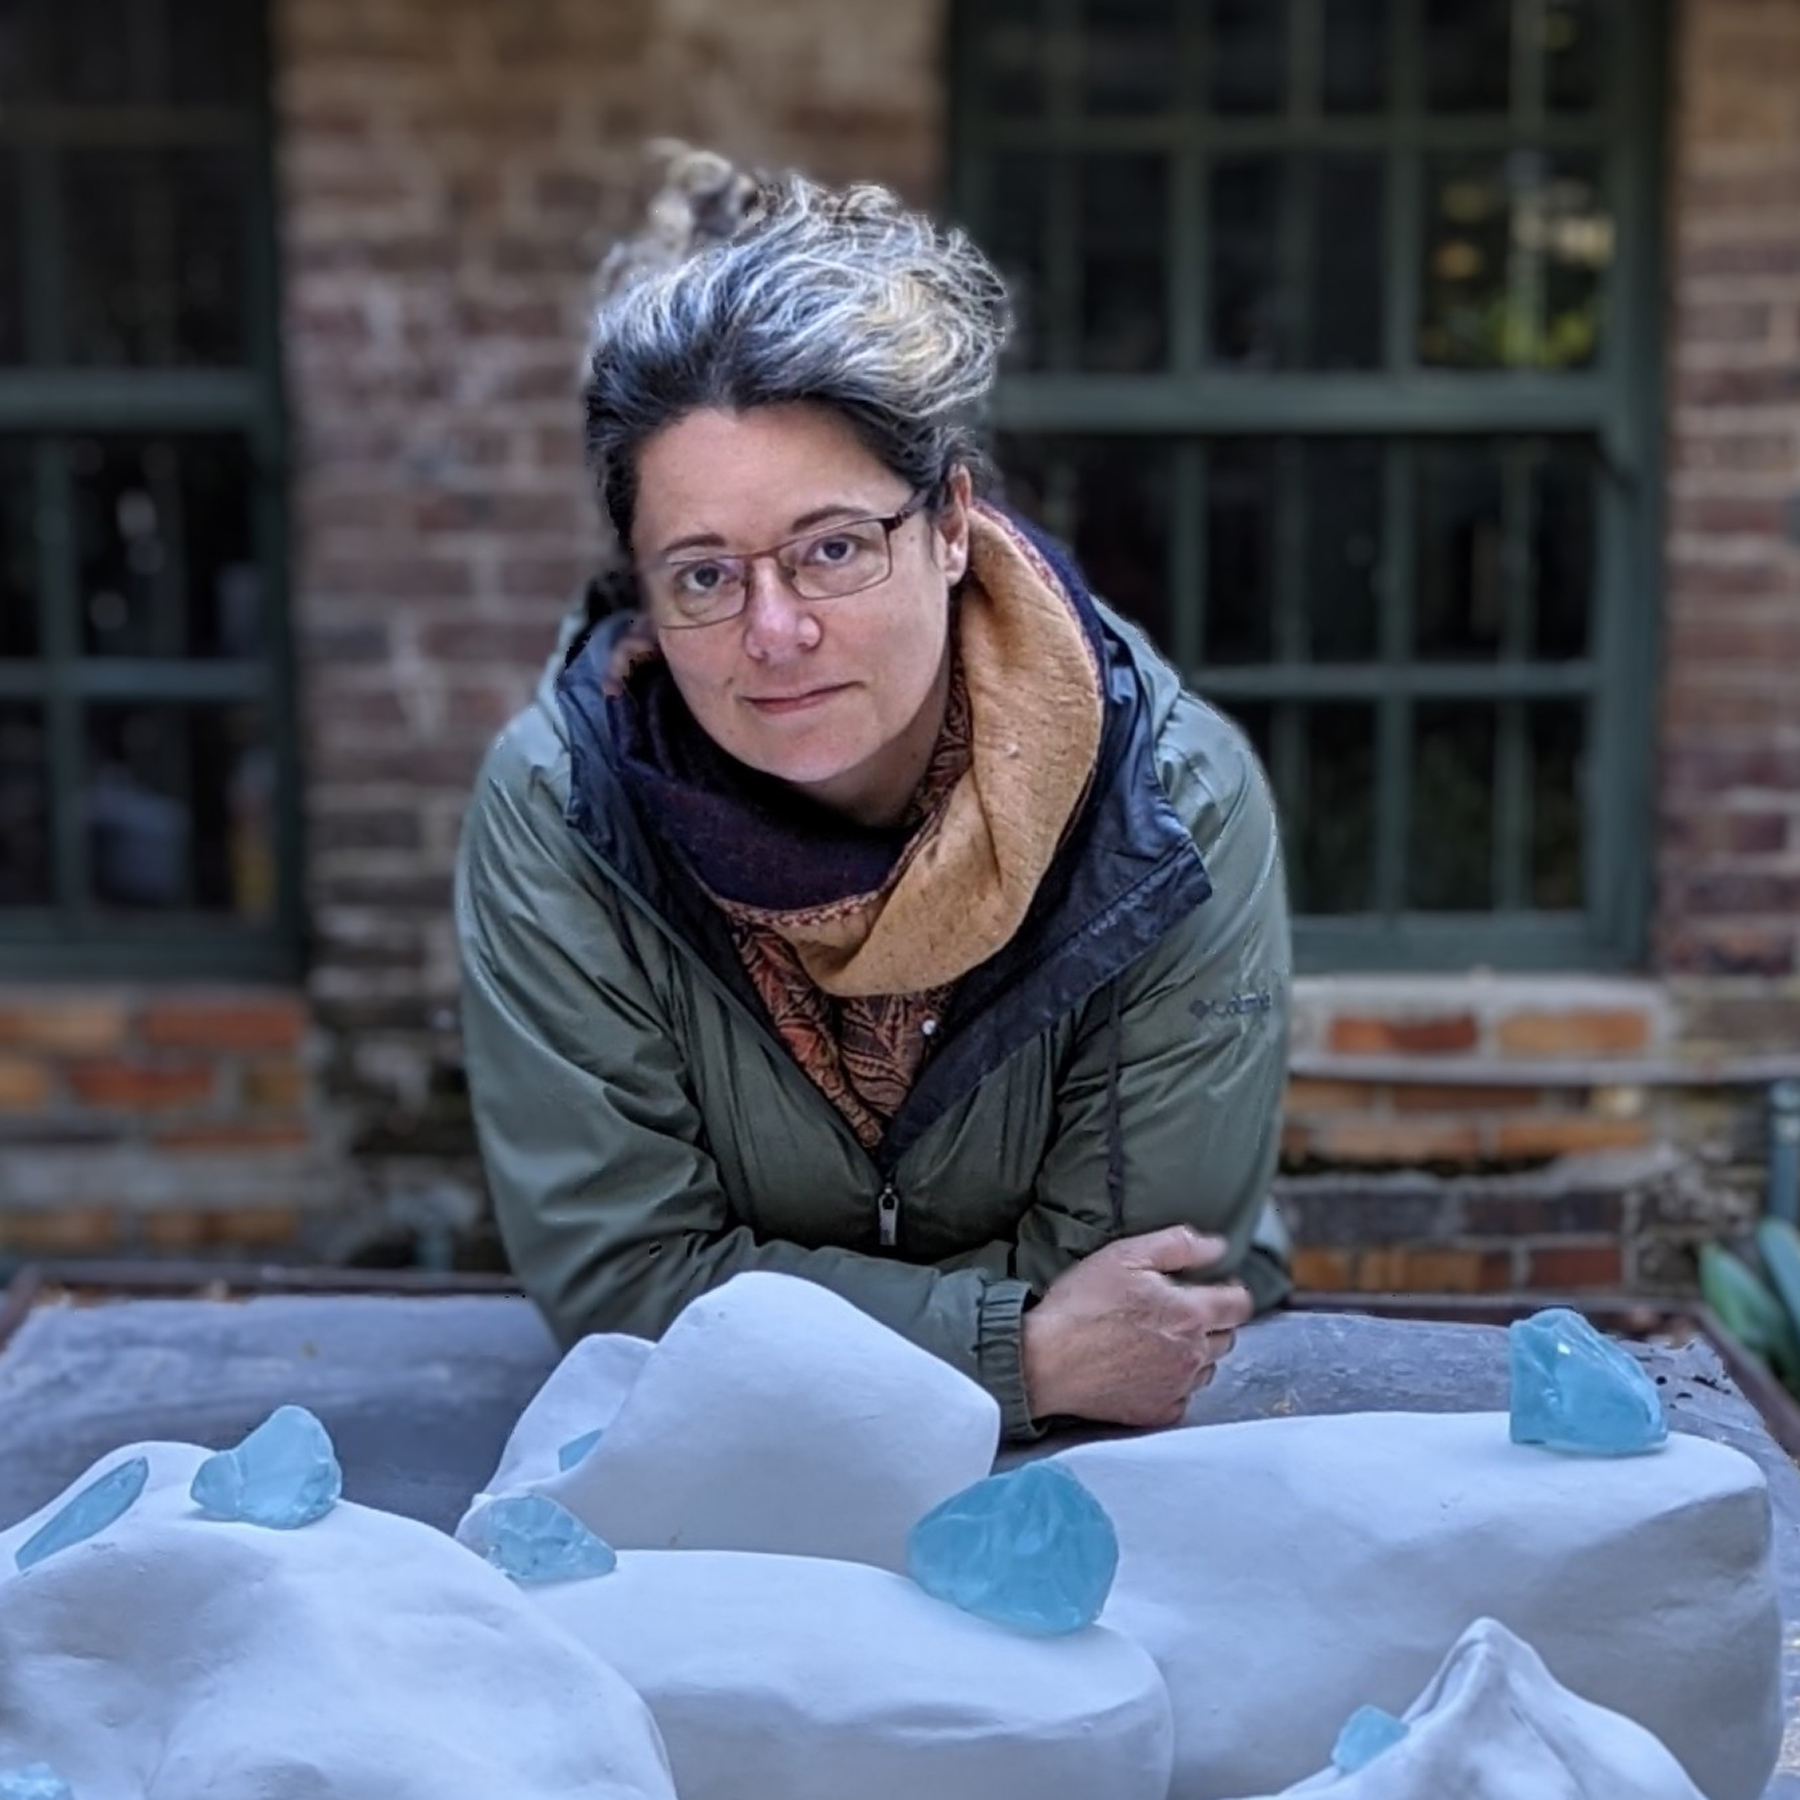 Lysanne Larose. A white woman leans forward, with her elbows on a table that displays white and ice blue sculptures. She is outside. She wears glasses, a green coat and a scarf. Behind her, a brick wall with windows.